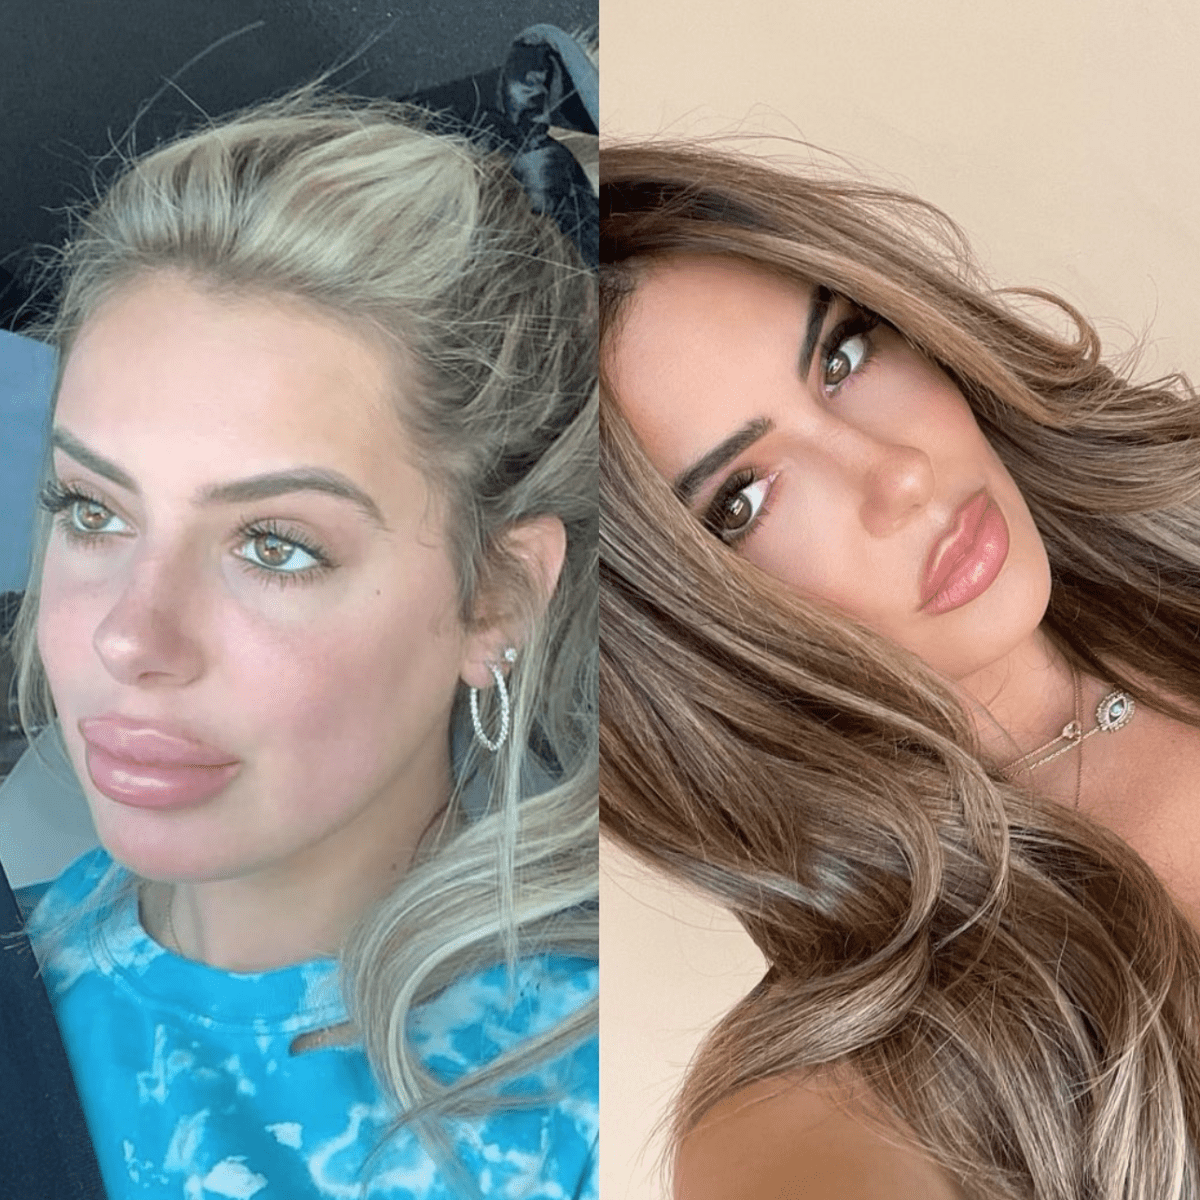 Brielle Biermann shares before and after photos of lip injection correction